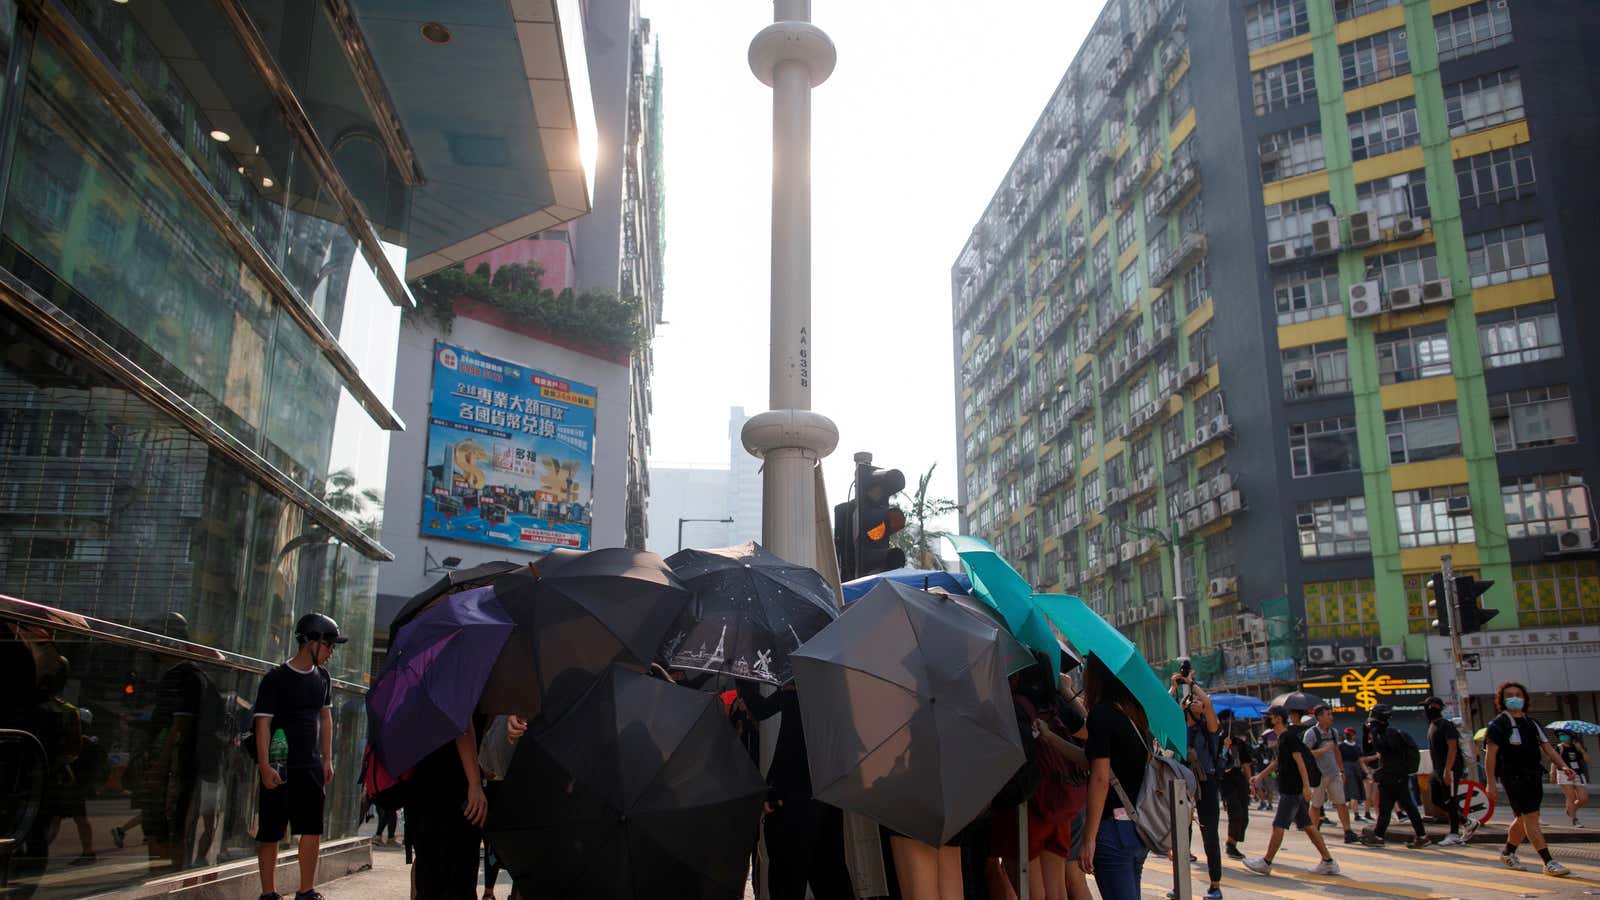 Demonstrators use umbrellas for cover as smart lampposts are damaged in Hong Kong.